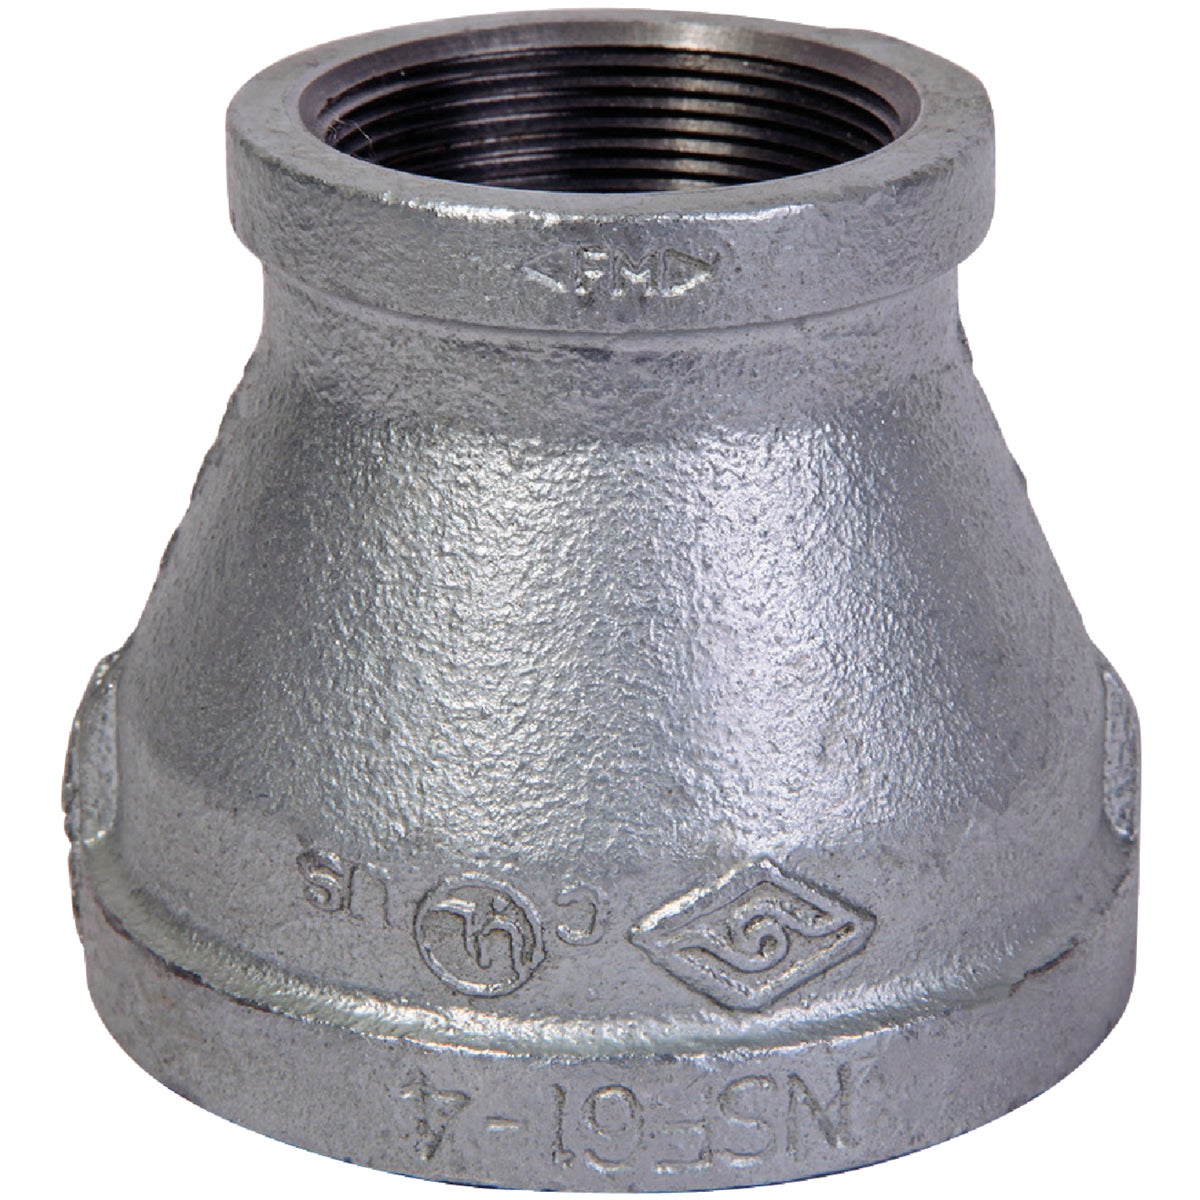 Southland 1-1/4 In. x 3/4 In. FPT Reducing Galvanized Coupling